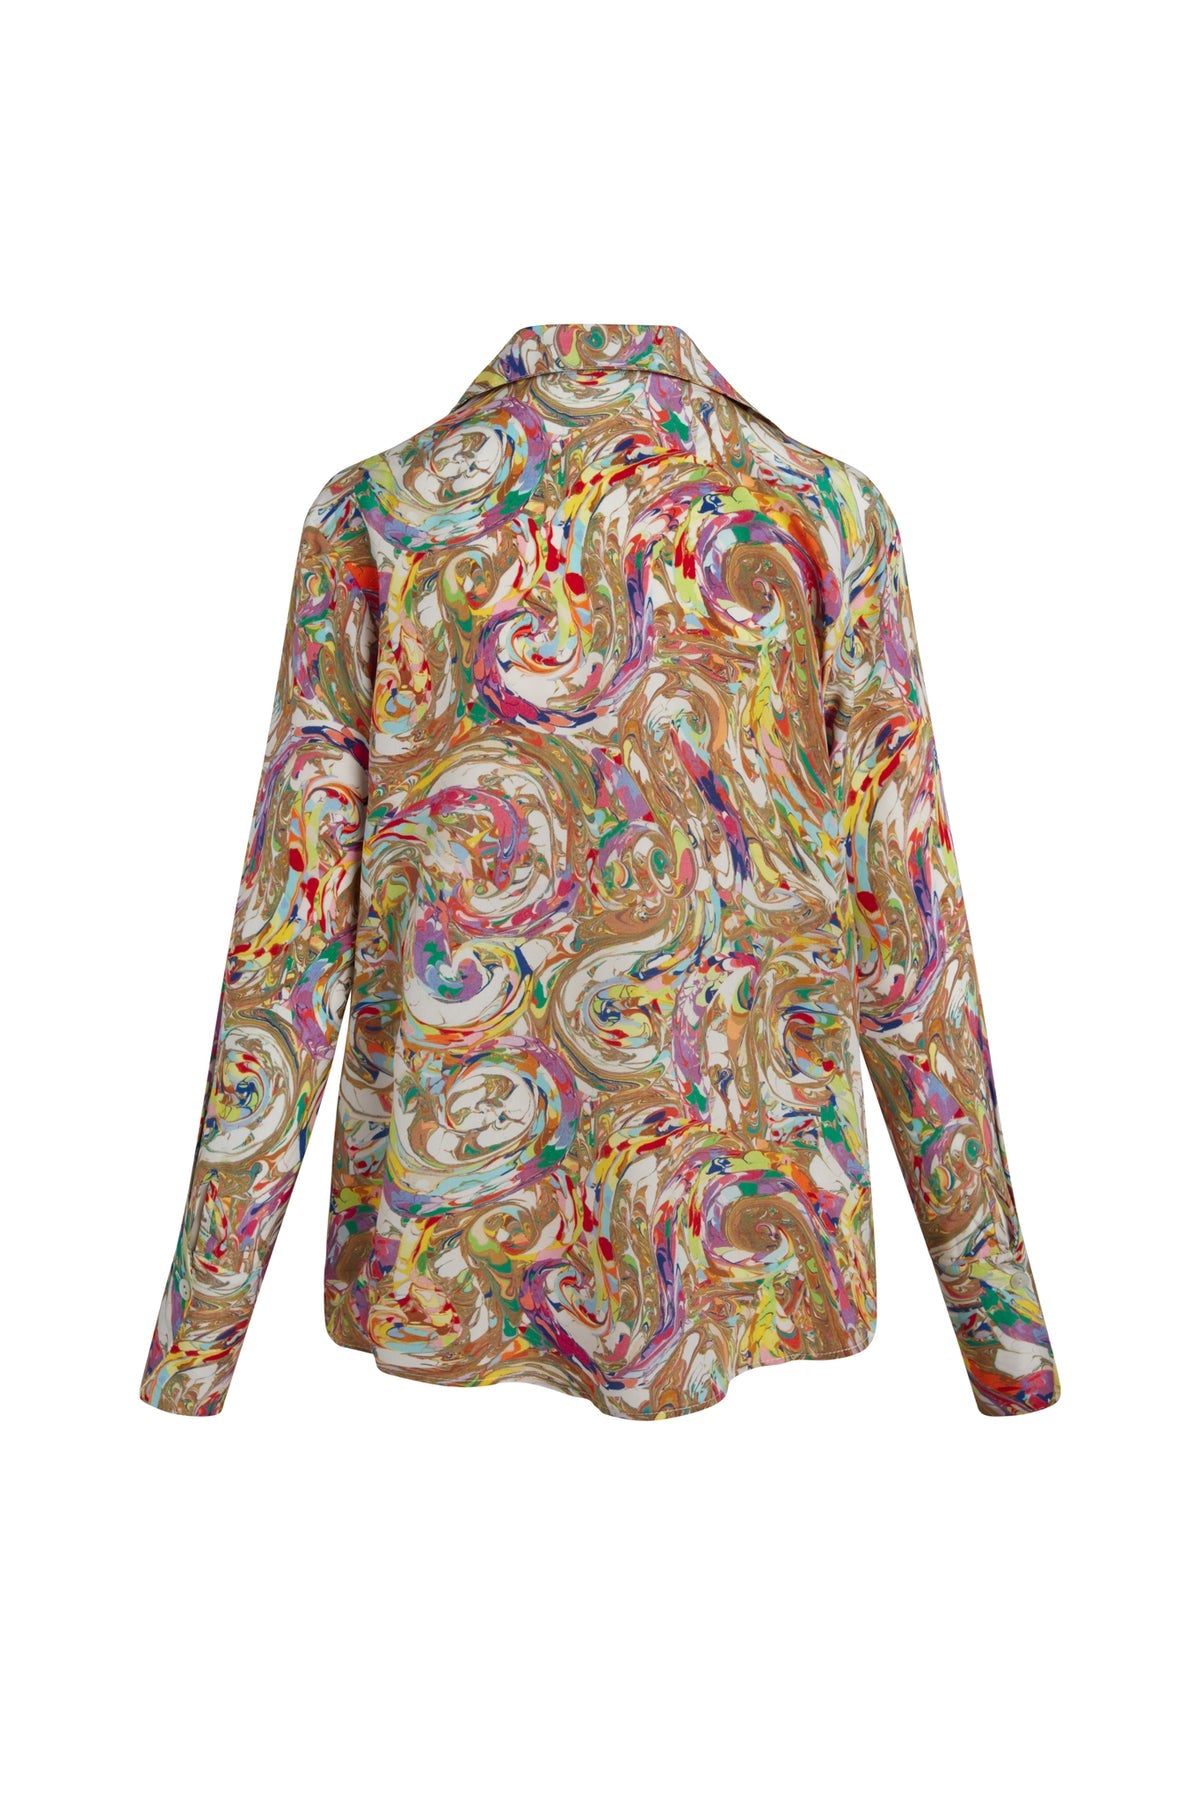 Catherine Gee Daria French Cuff Silk Blouse in Paint Swirl